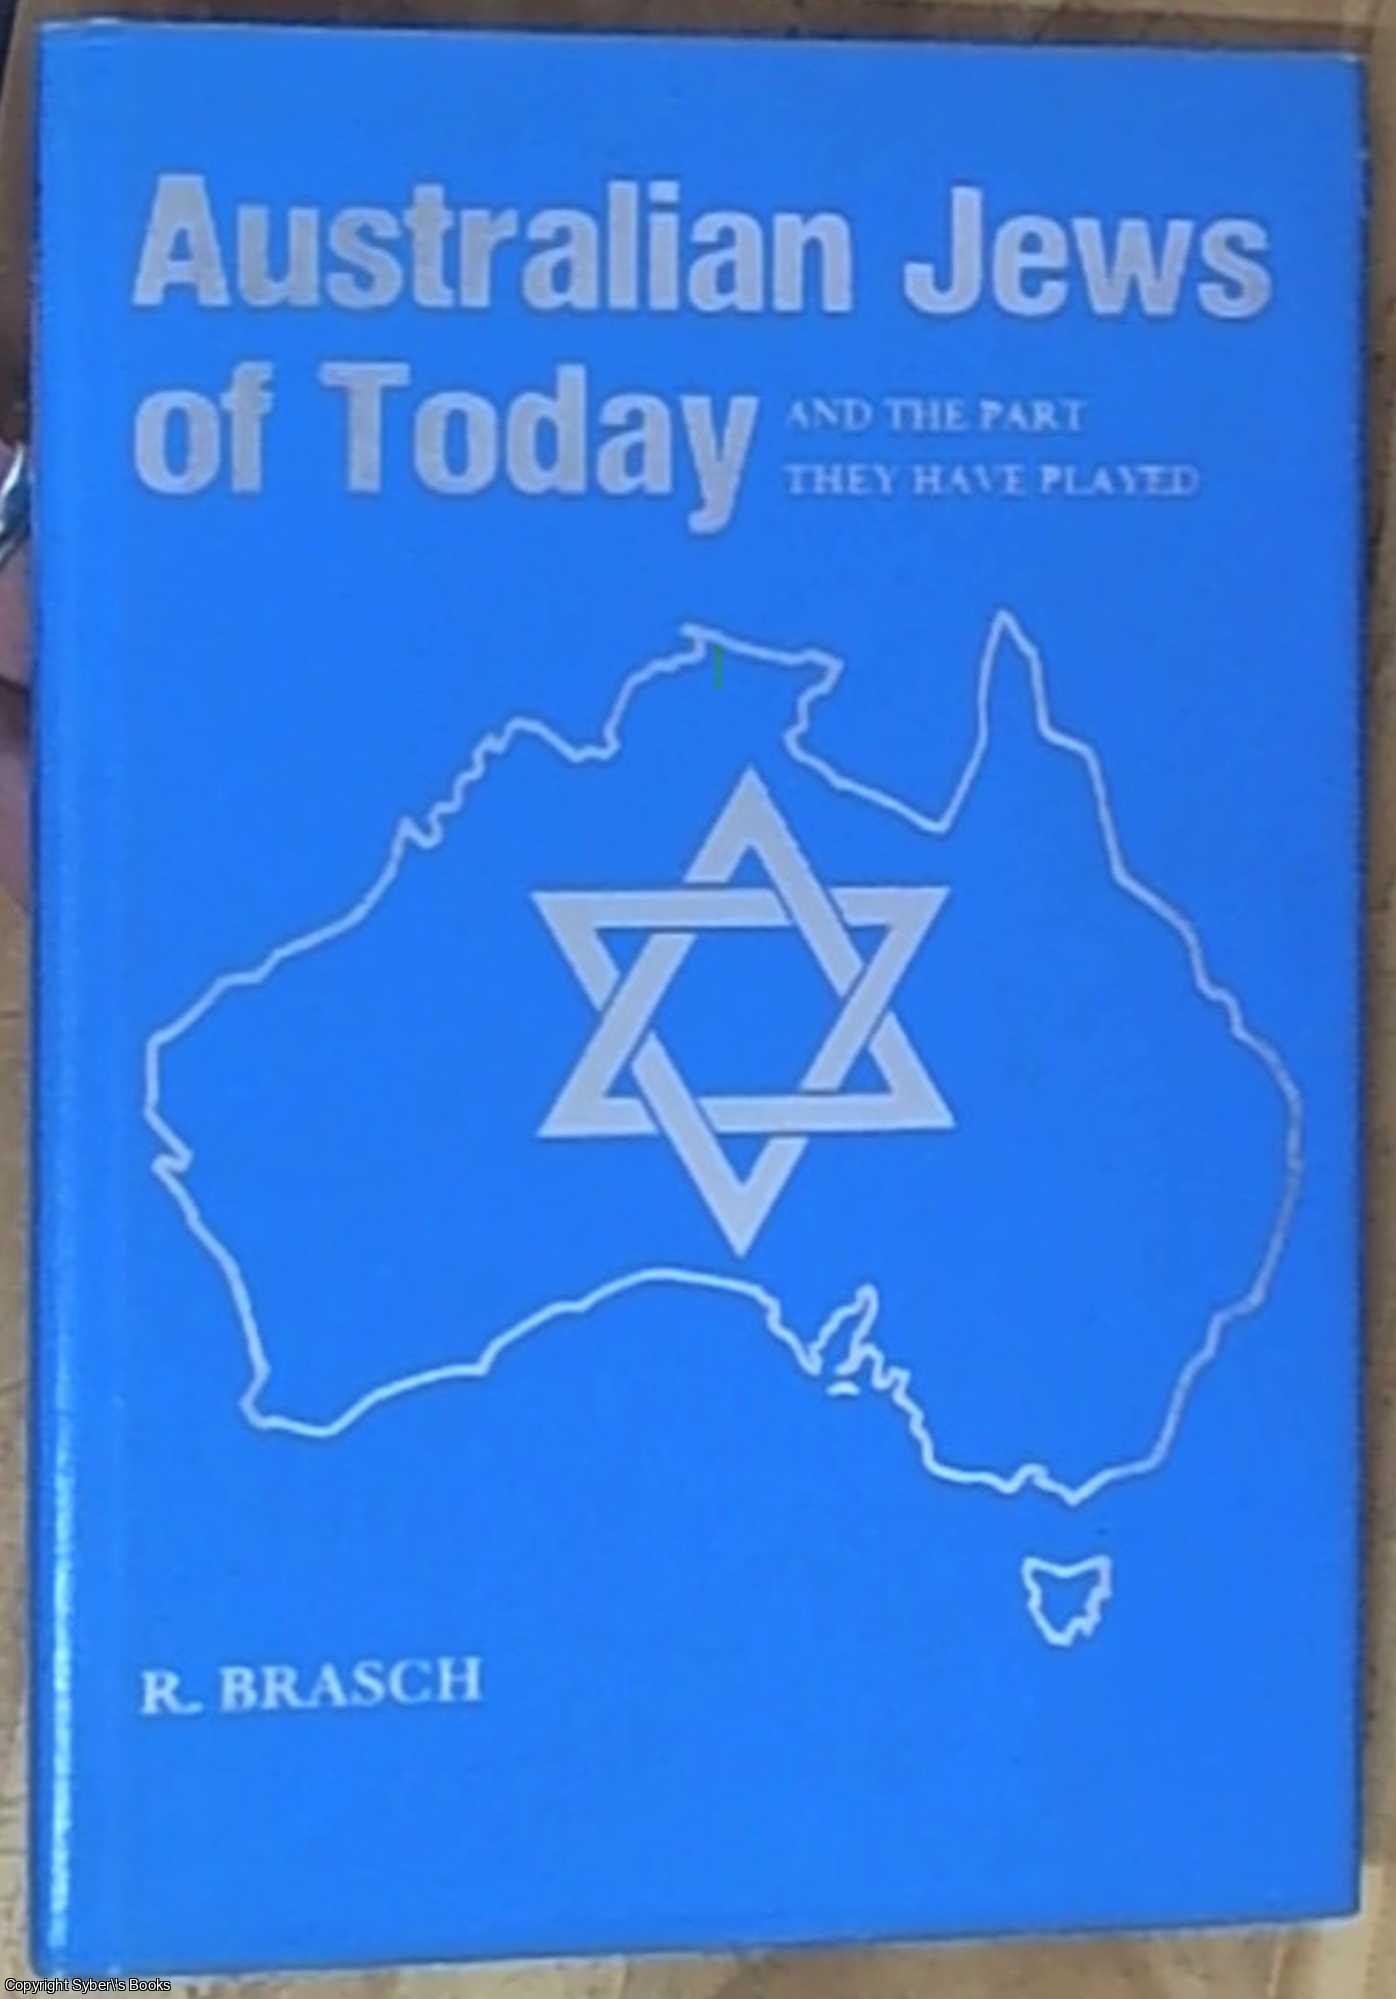 Brasch, R. - Australian Jews of Today and the Part They Have Played